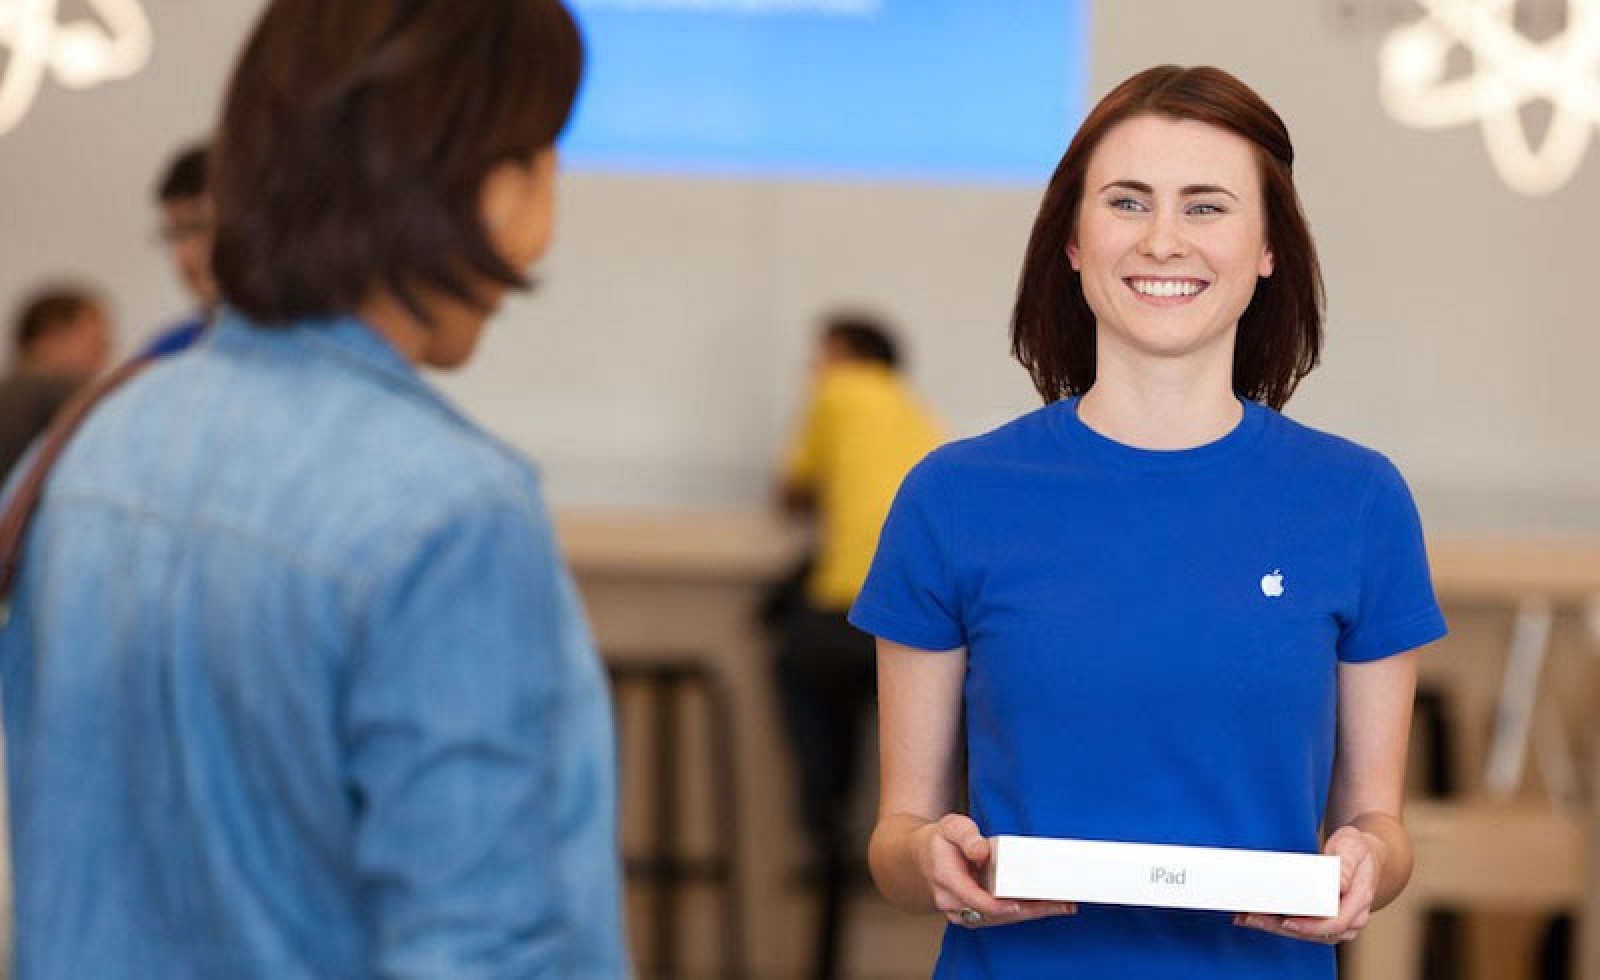 Personal Pickup - Apple employee delivering an iPad to a customer